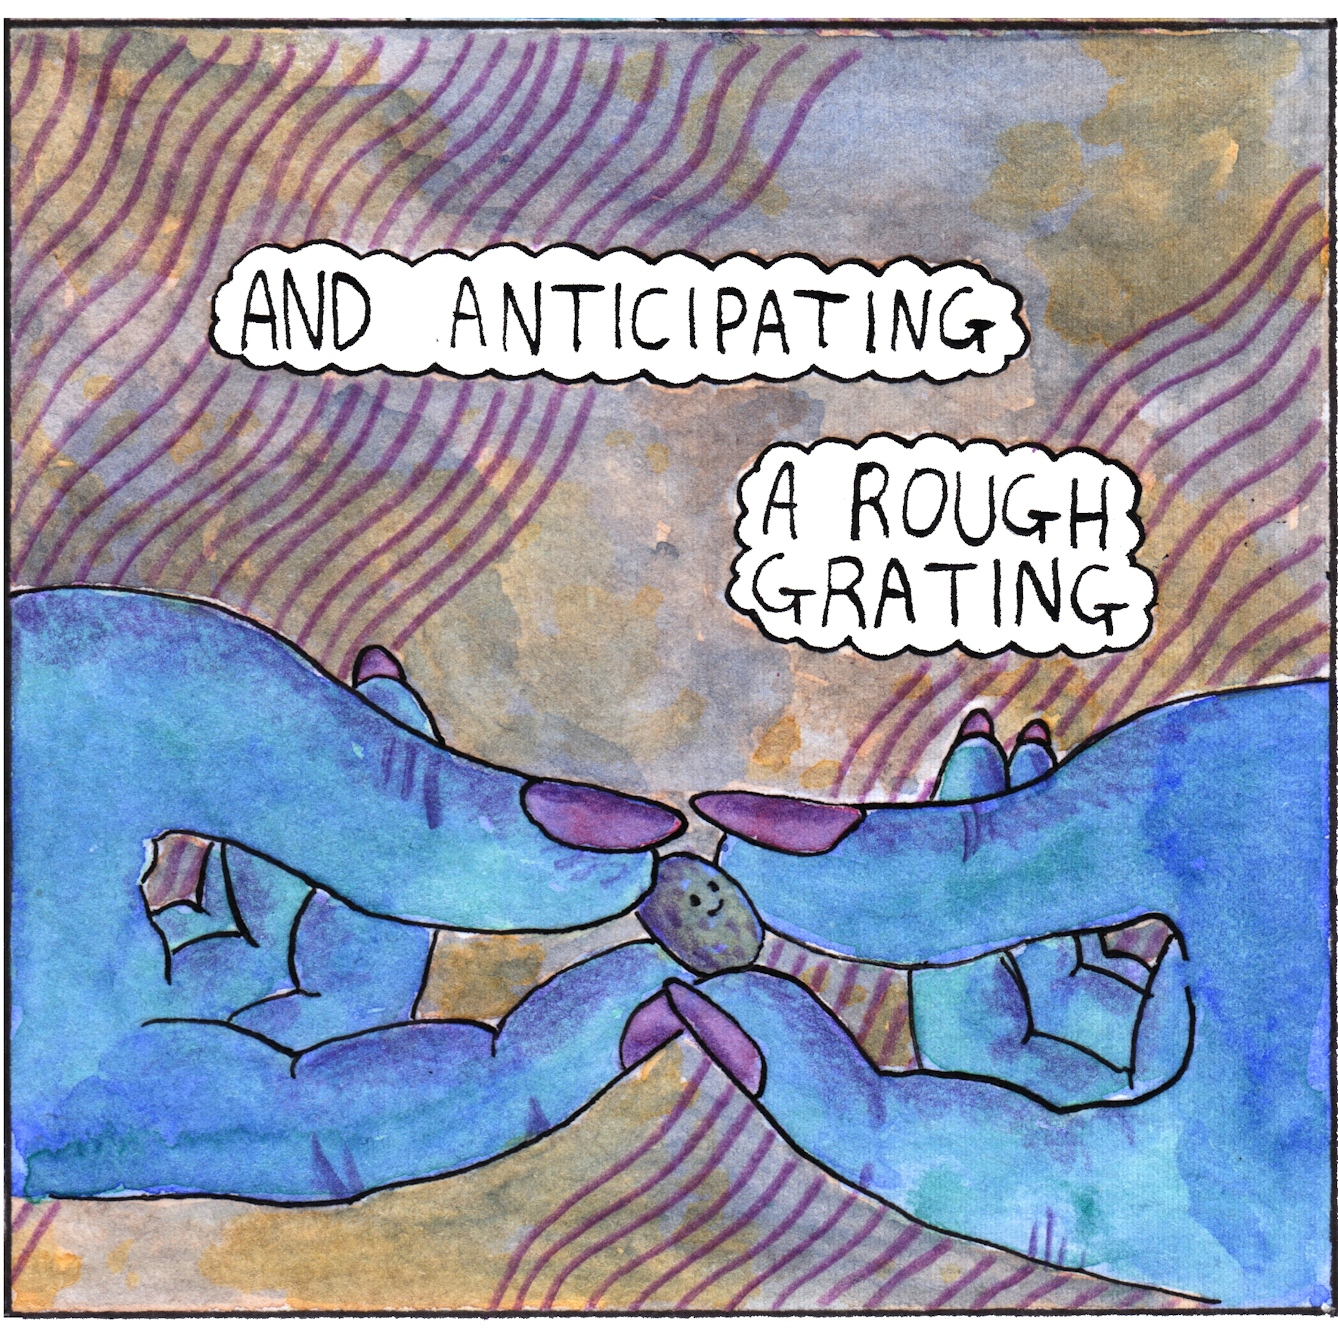 Panel six of the web comic 'Nutmeg': Two large blue hands are holding the smiling nutmeg lightly between thumbs and forefingers. The background is the brown and purple-striped inside of the barista's apron pocket. Text bubbles read “And anticipating a rough grating” 